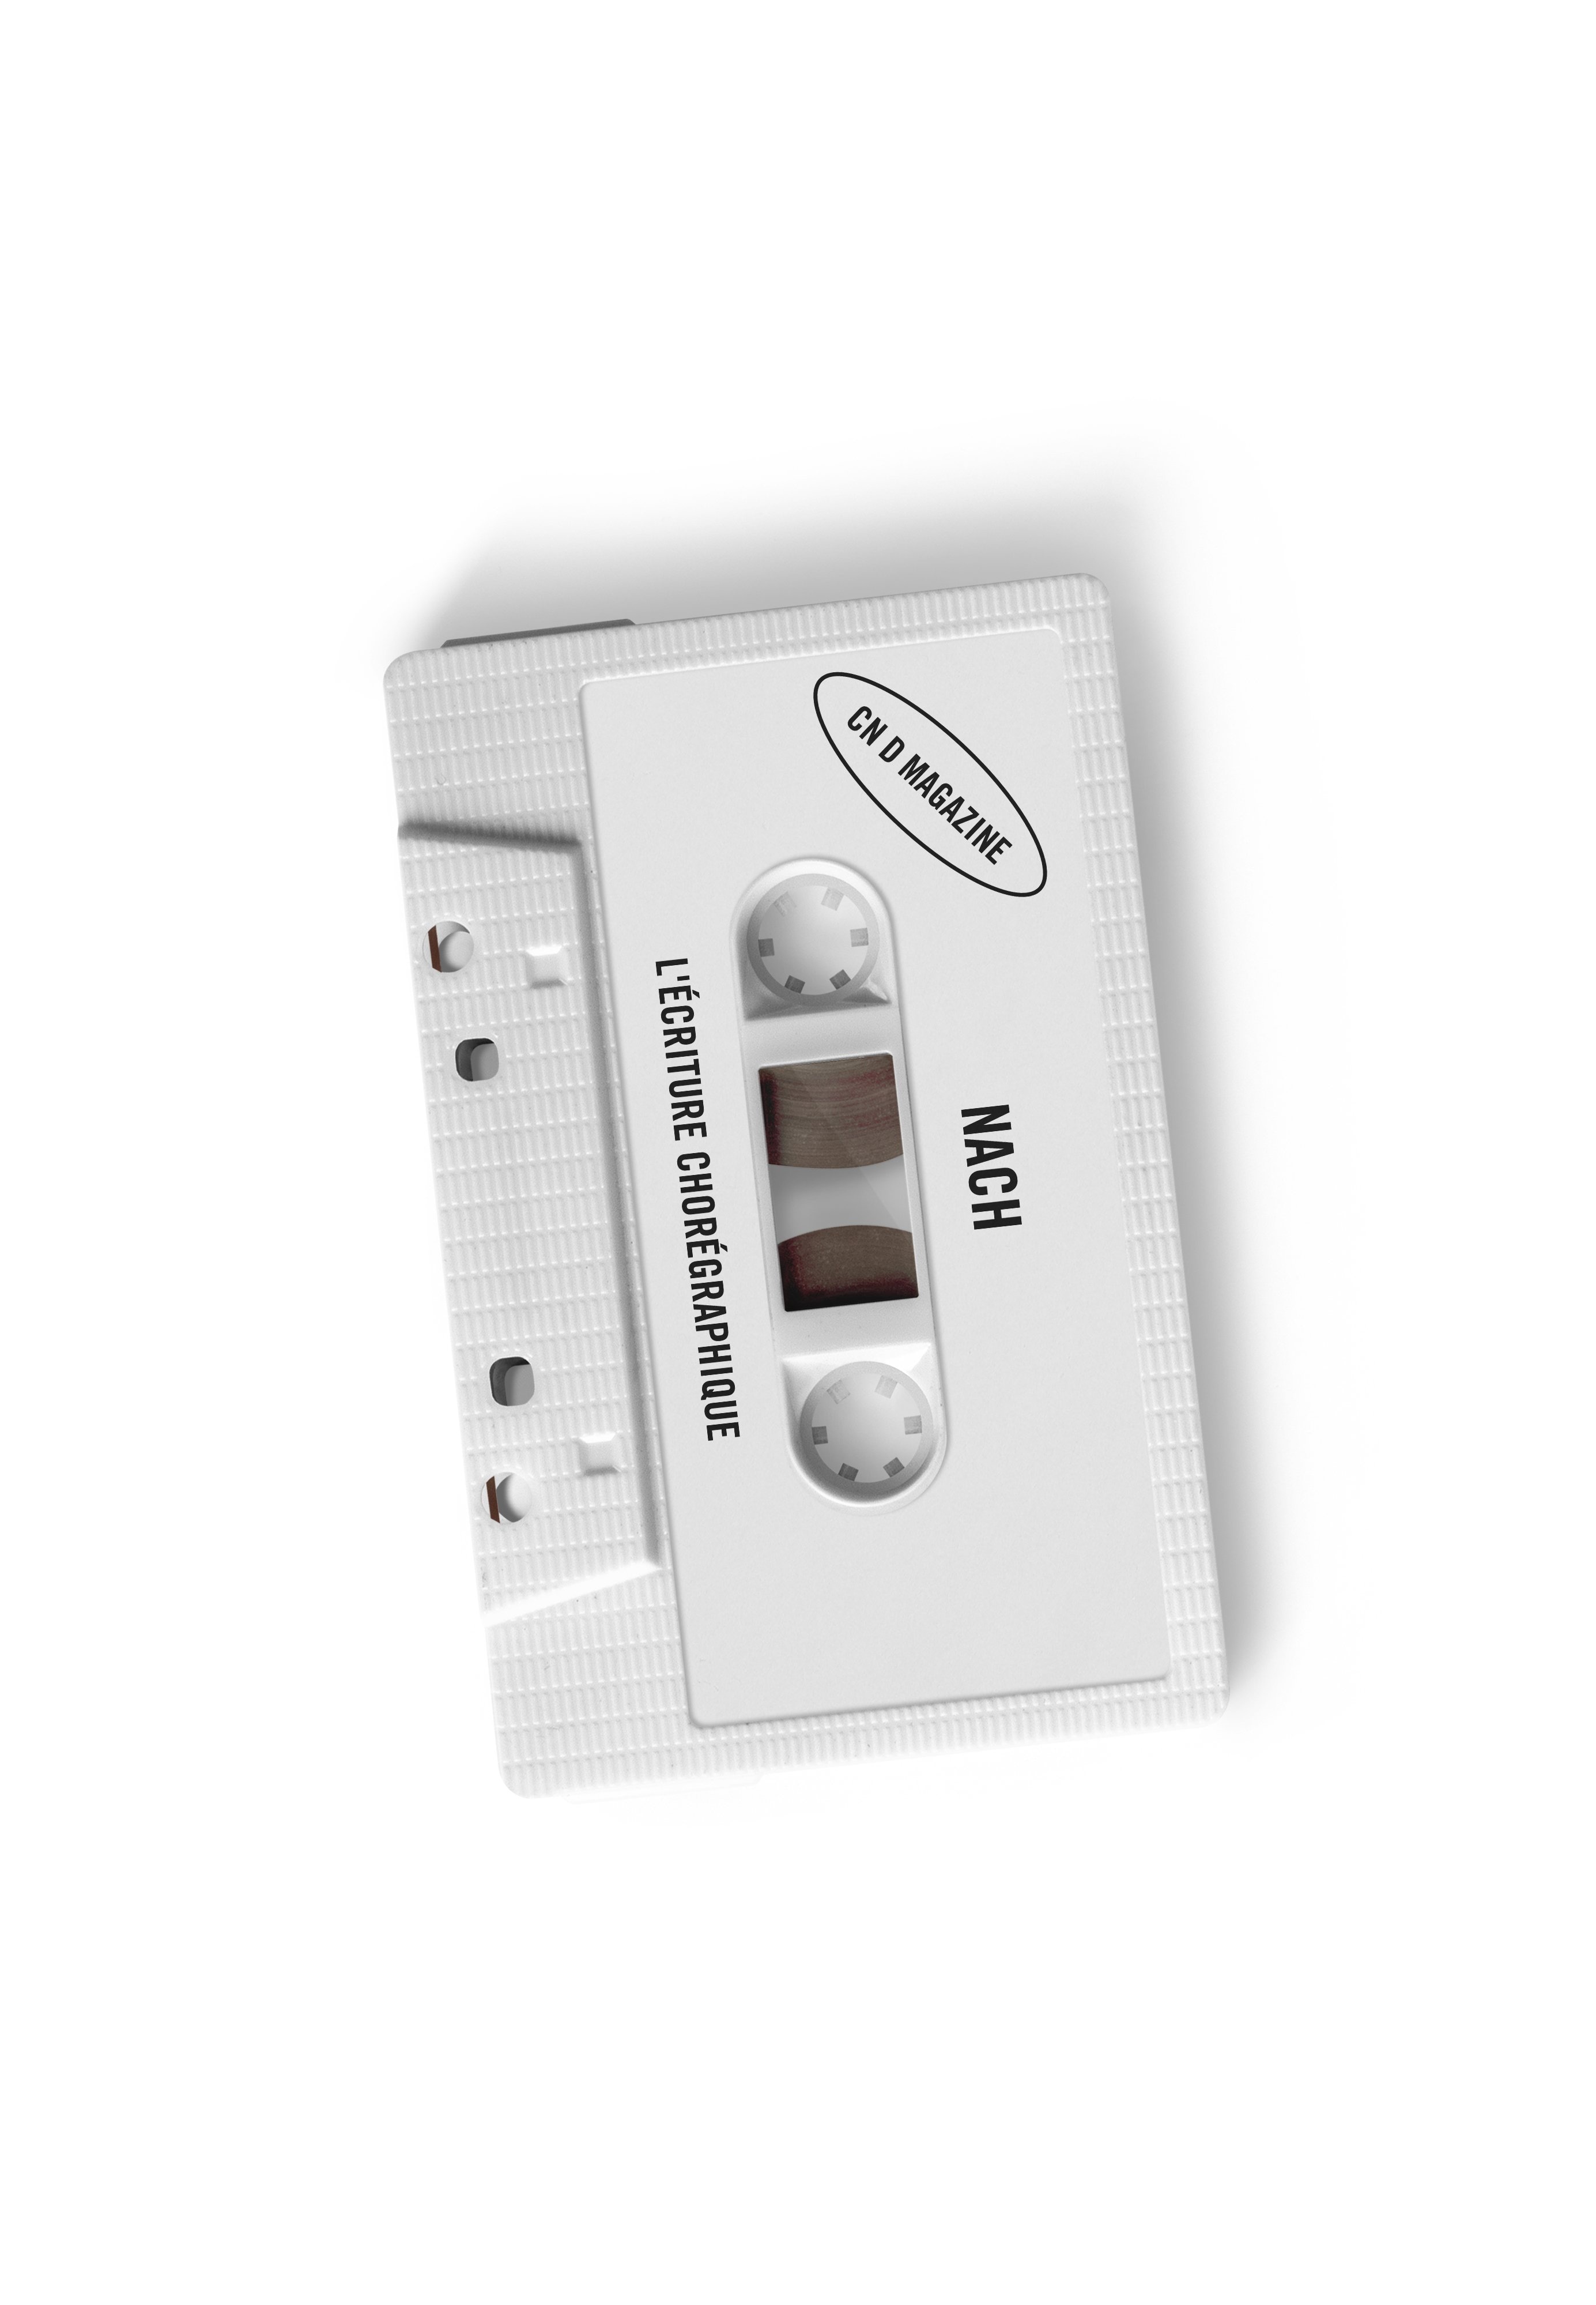 A white audio cassette on a black background with the name of Nach